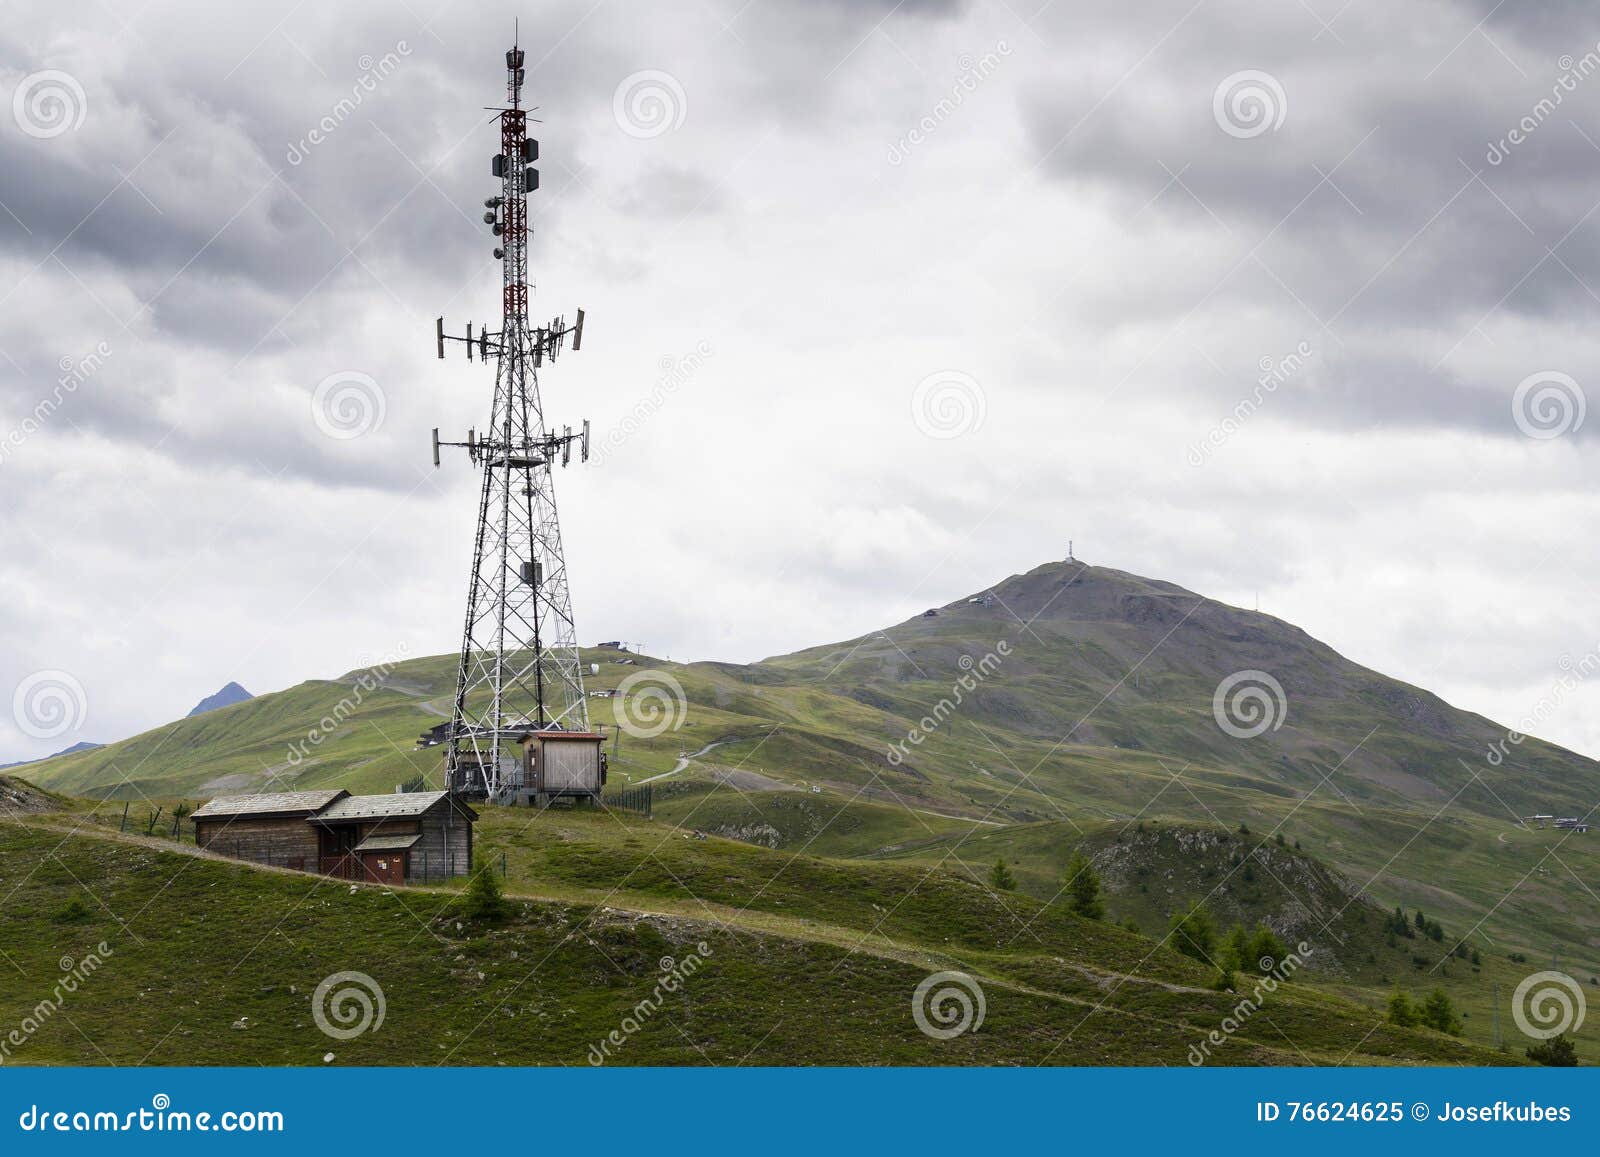 telecommunication tower with monte della neve in background